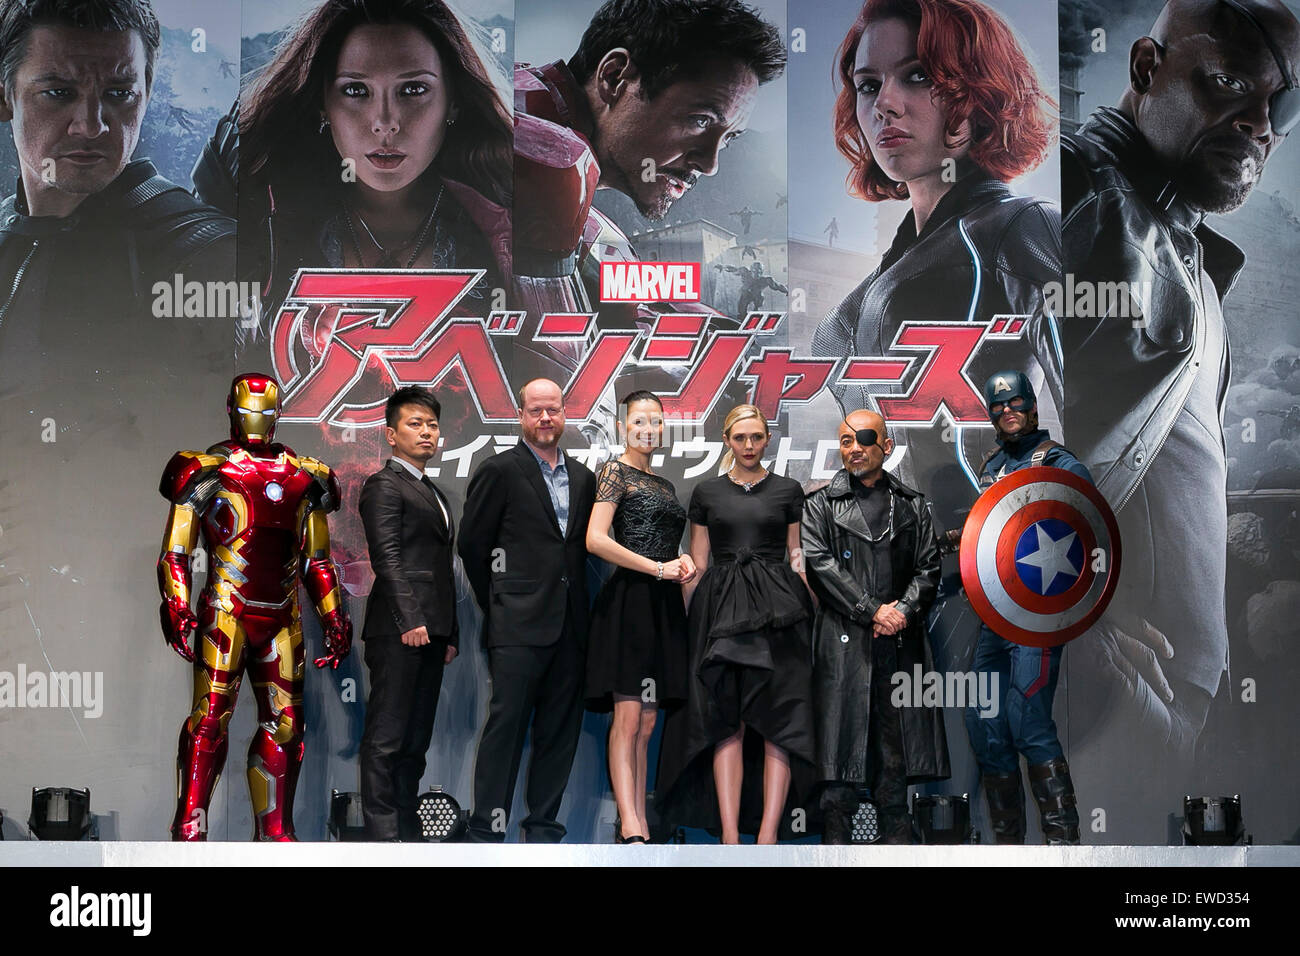 (L to R) Iron Man, actor and comedian Hiroyuki Miyasako, director Joss Whedon, actress Ryoko Yonekura, actress Elizabeth Olsen, actor and comedian Naoto Takenaka and Captain America pose for the cameras during the Japanese premiere for the film 'Avengers: Age of Ultron' in downtown Tokyo, Japan on June 23, 2015. The movie will be distributed in Japan by Walt Disney Studio Japan with a nationwide release from July 4th. Credit:  Rodrigo Reyes Marin/AFLO/Alamy Live News Stock Photo